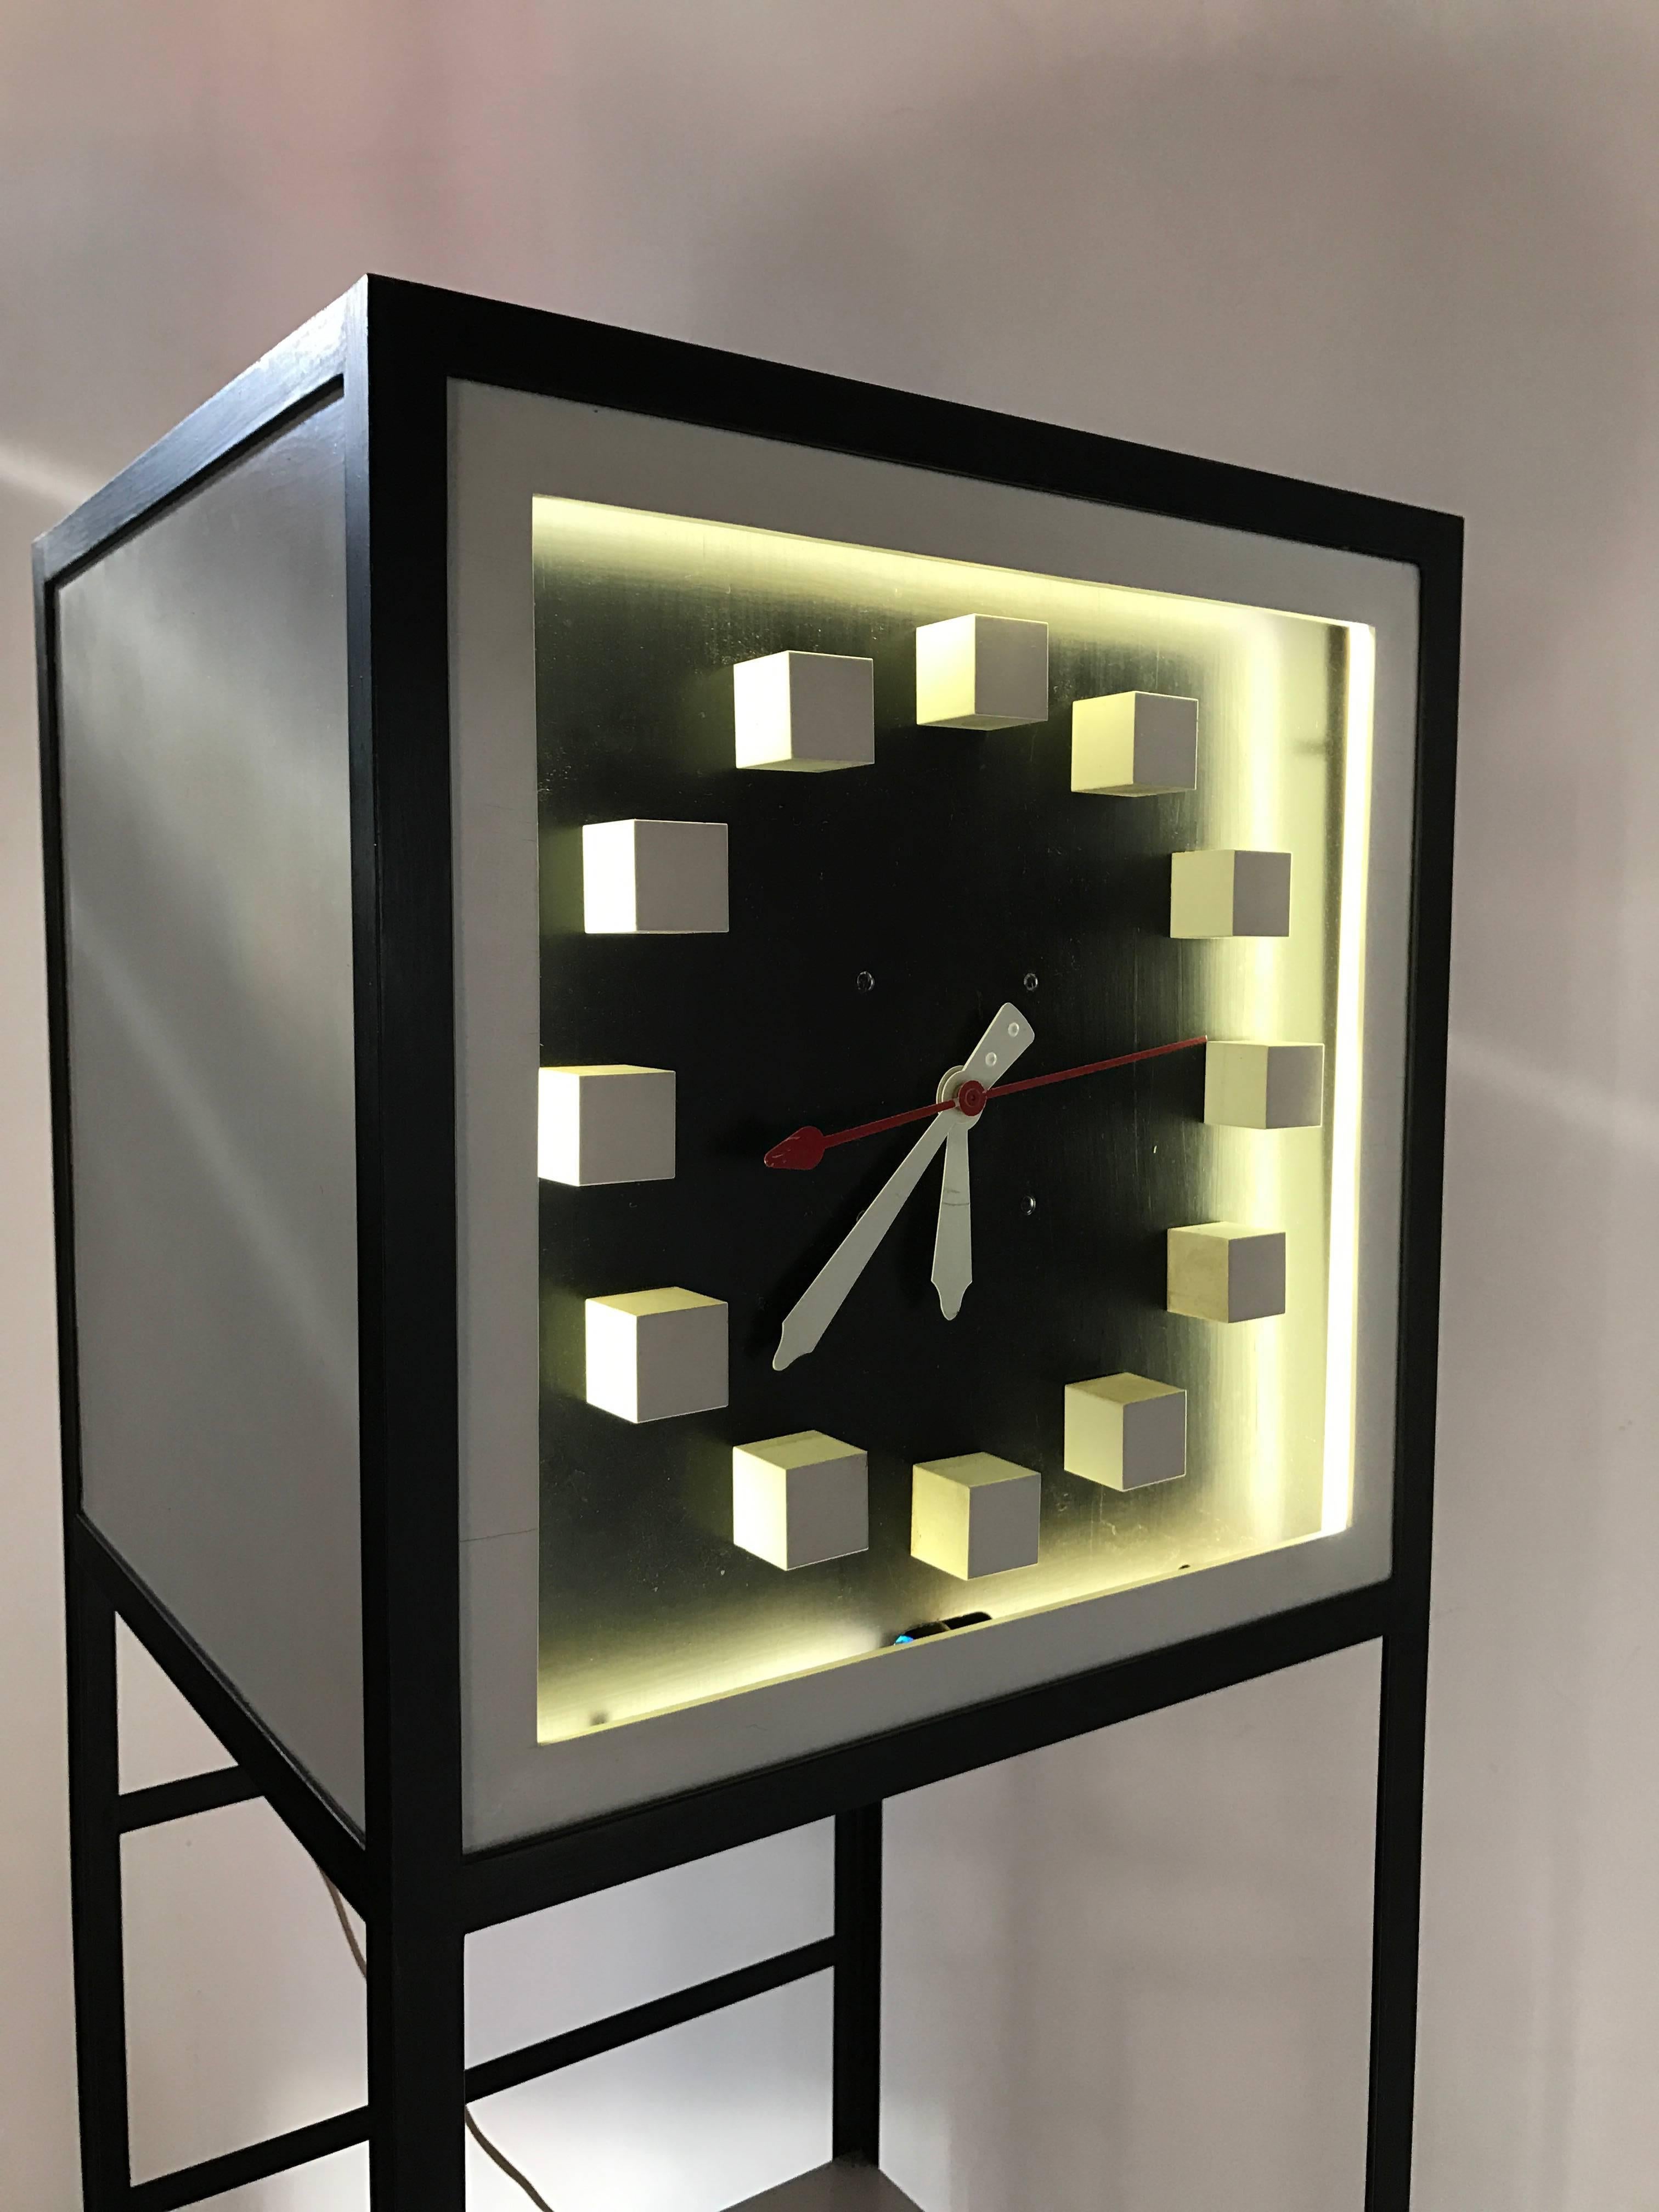 Unusual modernist grandfather clock or shelf, possibly designed by Frederik Weinberg, black iron frame, wood shelves, wood number markers, retains original white neon to illuminate face, amazing architectural design.